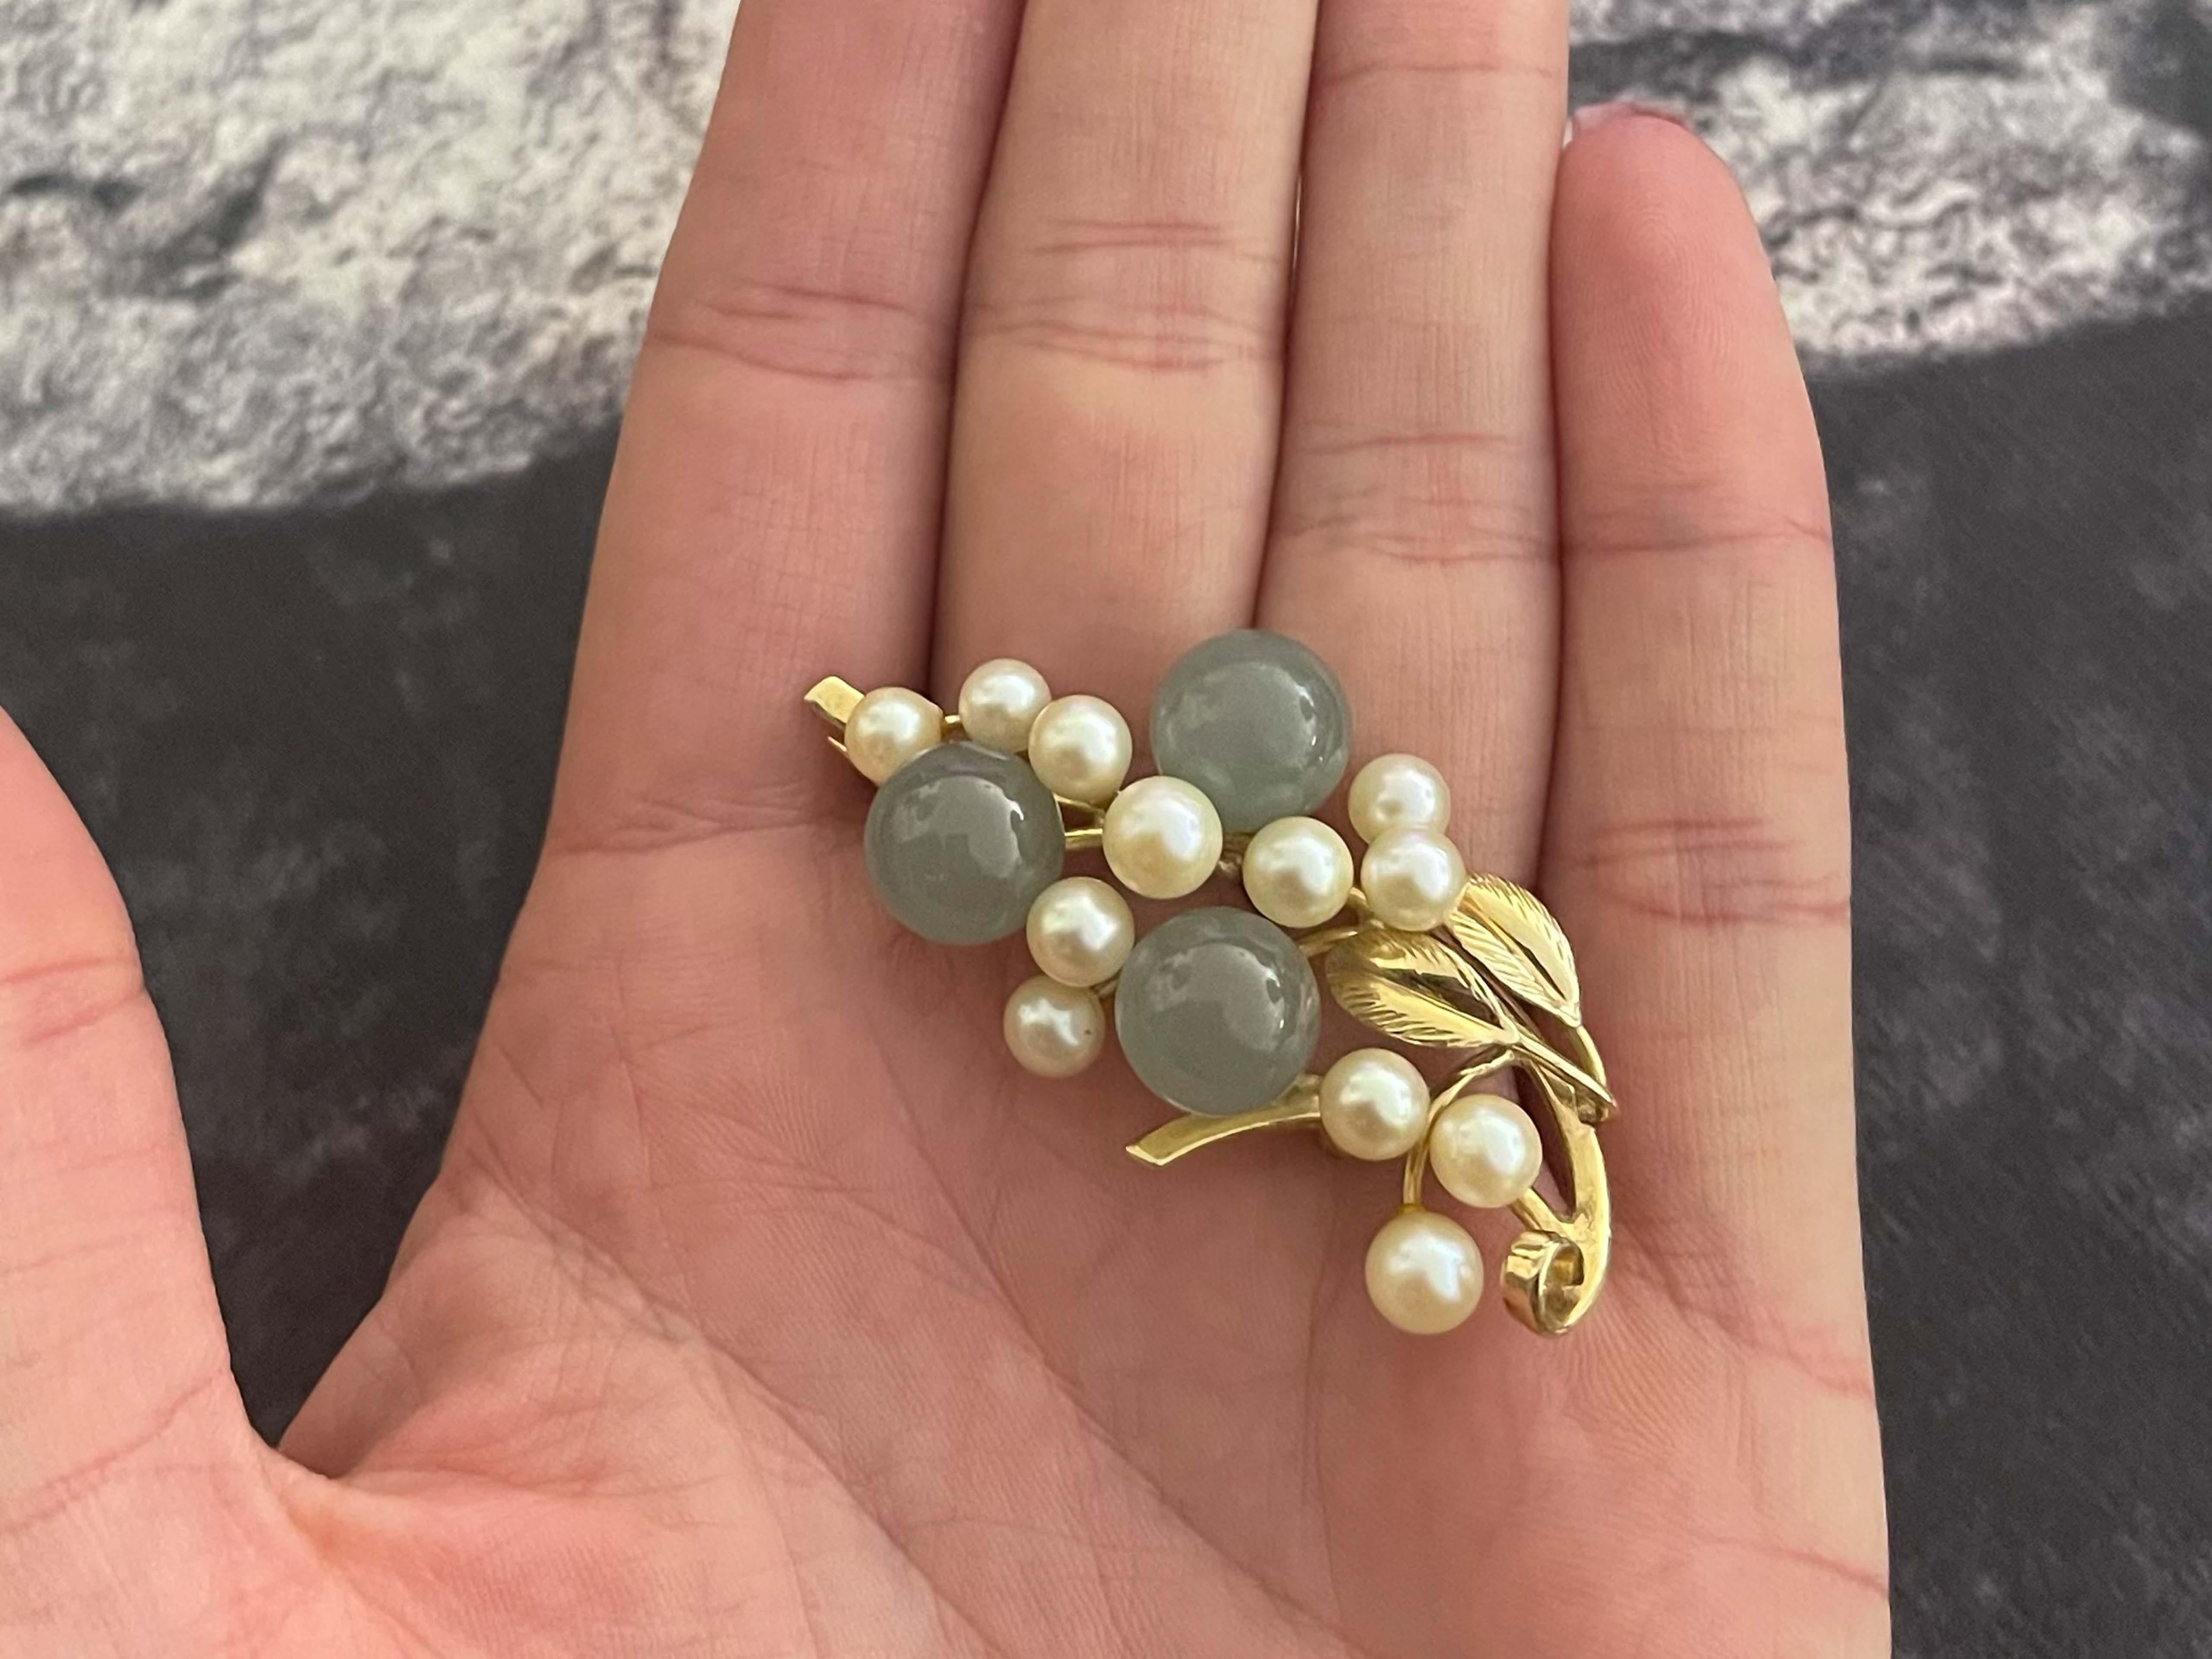 Brooch Specifications:

Designer: Ming's

Metal: 14k Yellow Gold

Total Weight: 13.0 Grams

Stones: Jade and akoya pearls

Brooch Measurements: 2